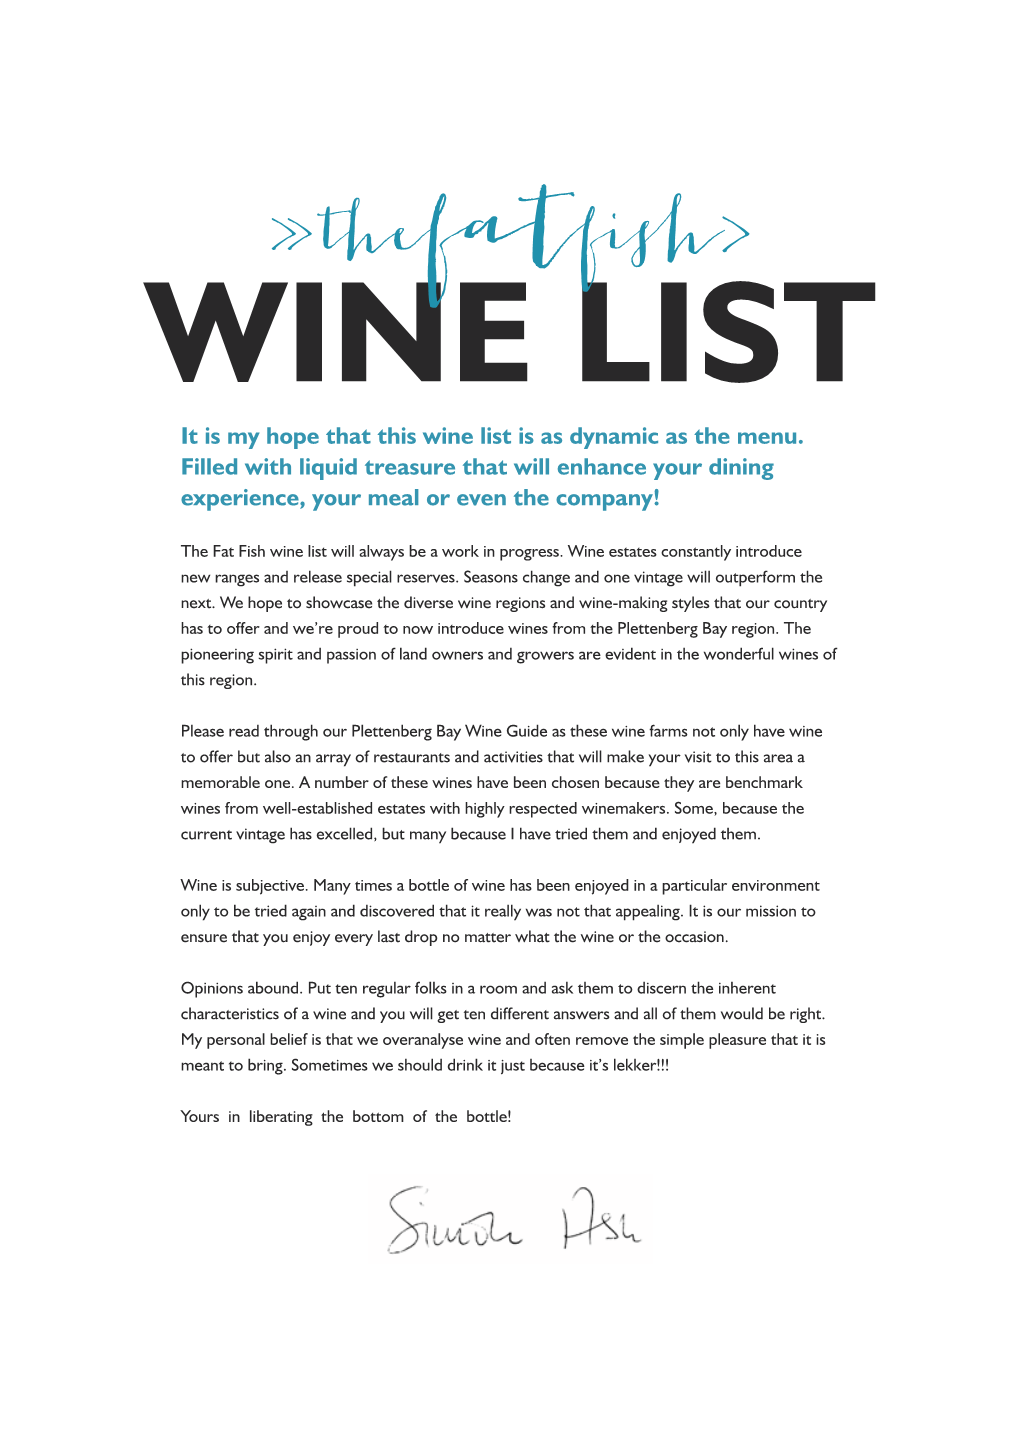 It Is My Hope That This Wine List Is As Dynamic As the Menu. Filled with Liquid Treasure That Will Enhance Your Dining Experience, Your Meal Or Even the Company!